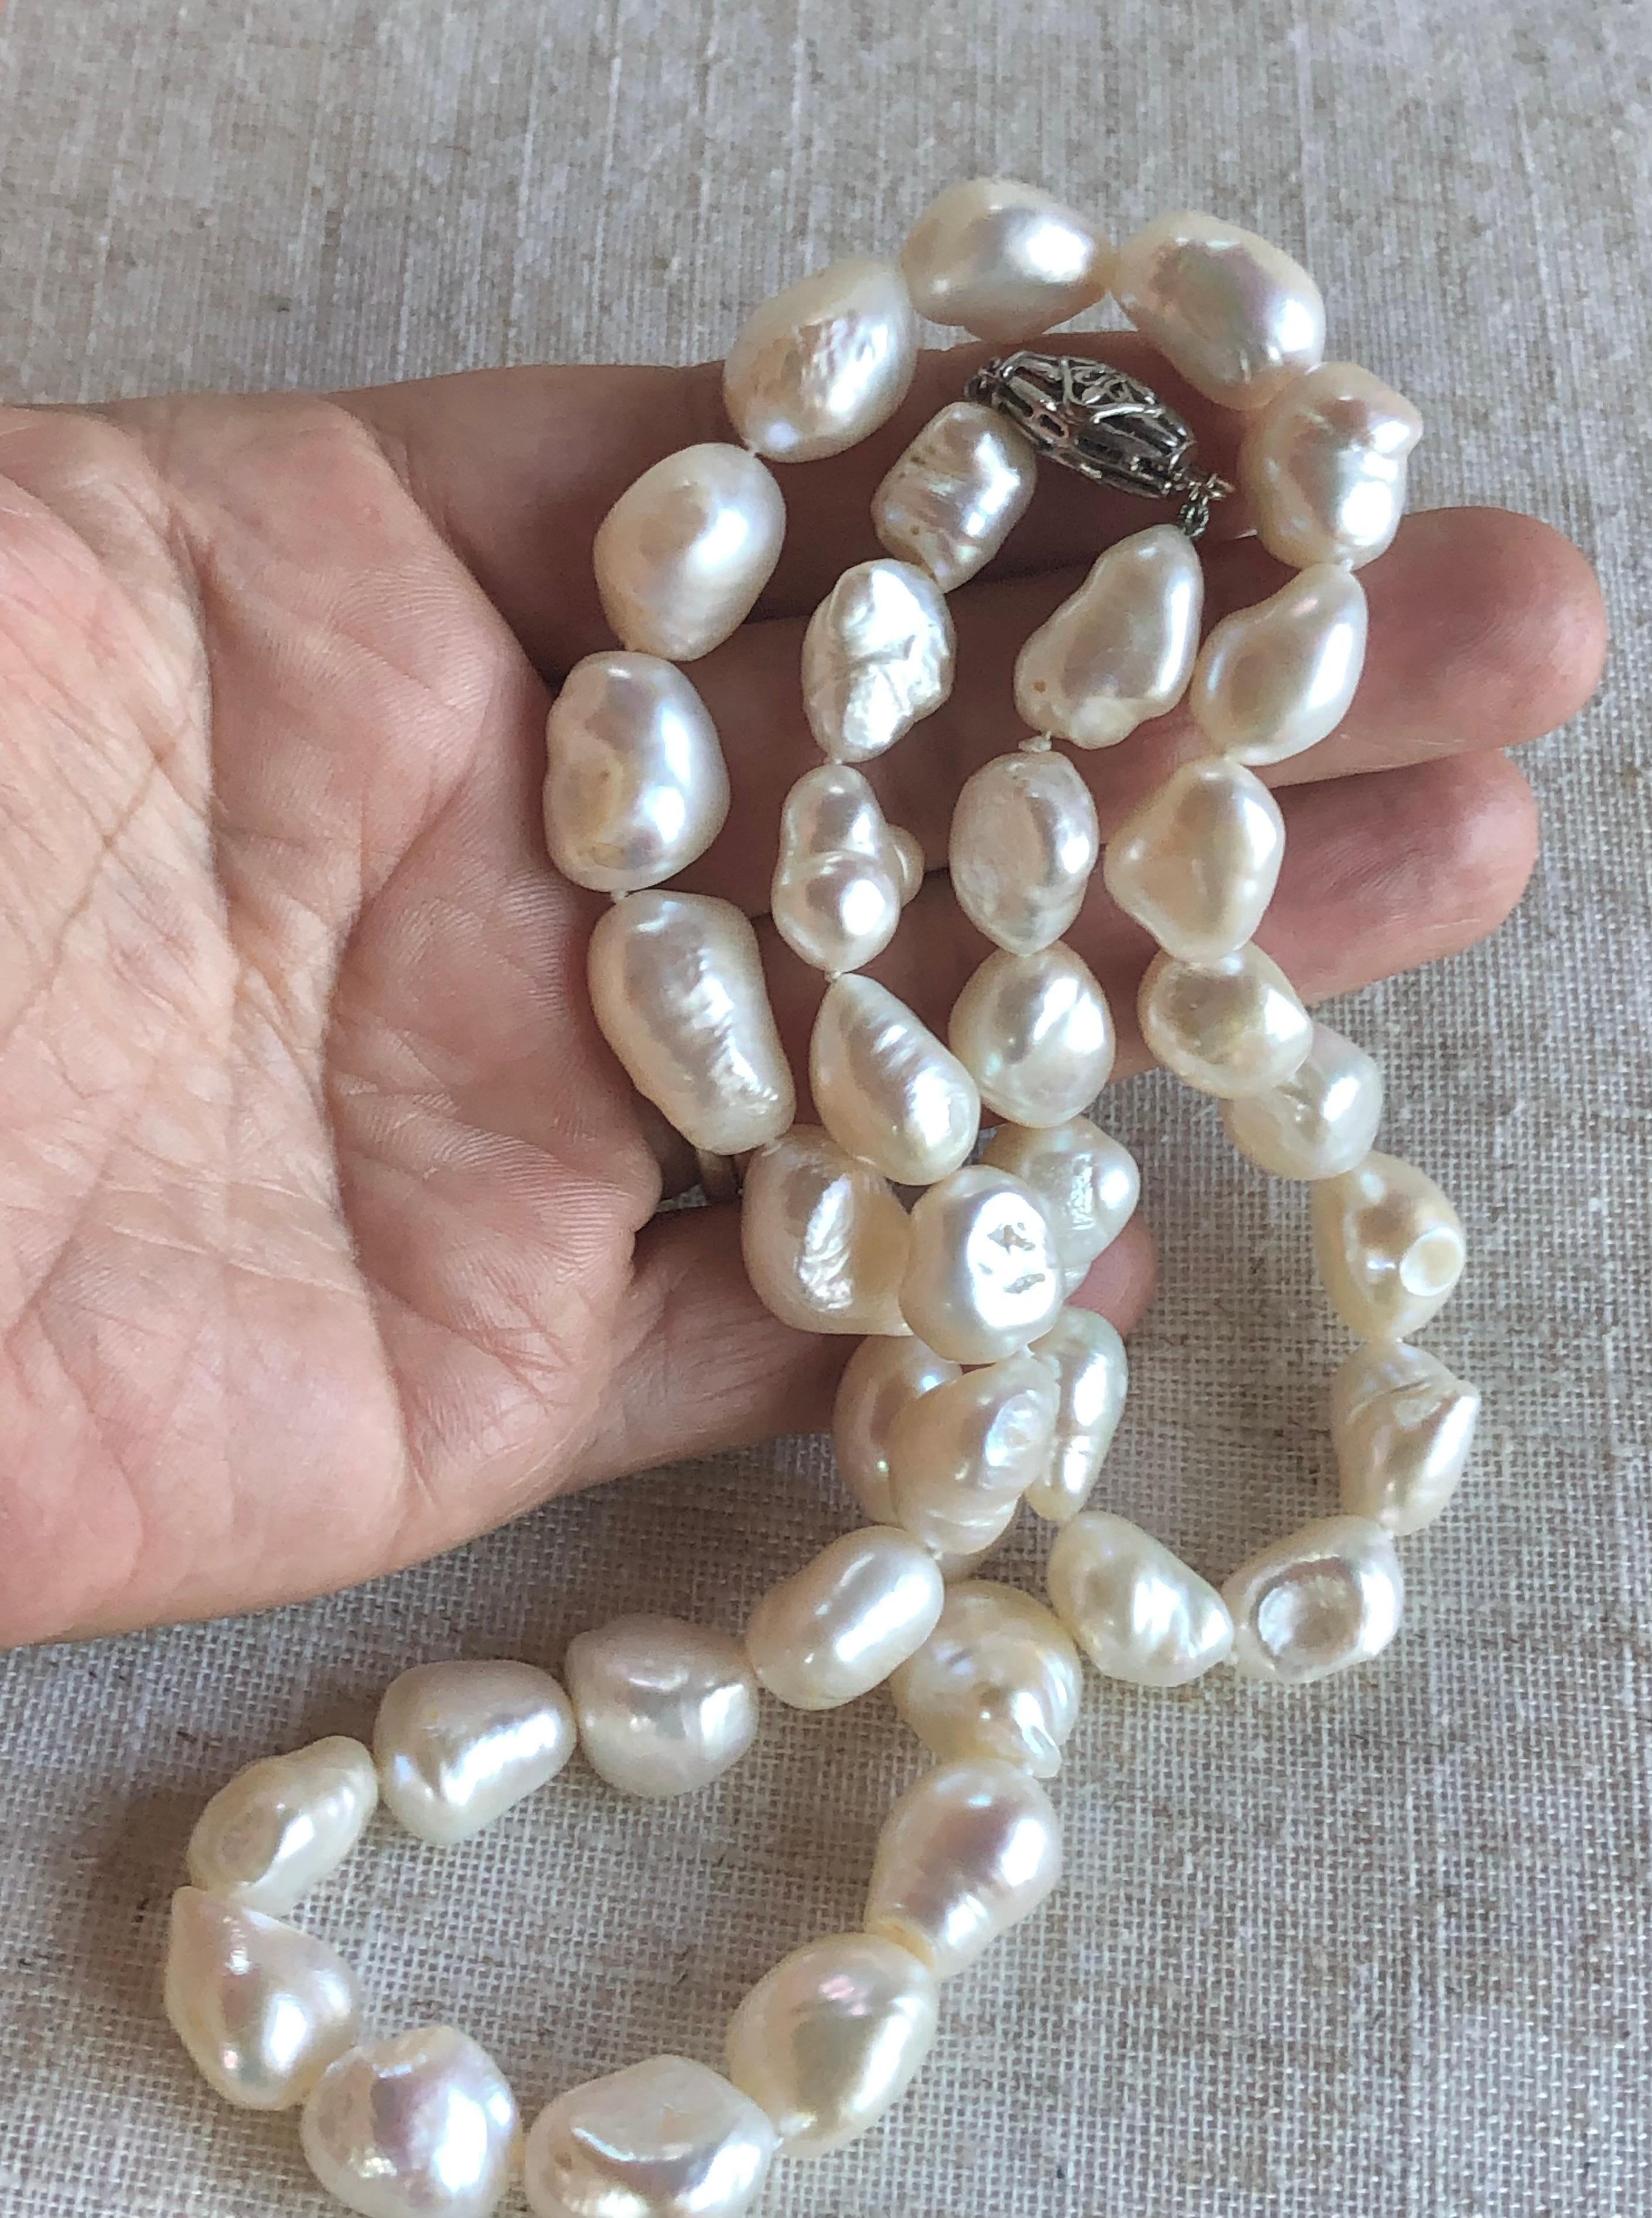 White Natural Big Baroque Pearls. The estate necklace has 38 baroque pearls and each one is completely unique, the necklace is 24 inches long. The largest Pearls are approximately 21mm x 15mm. and the smallest is 10mm x 9mm approx.
Silver clasp.